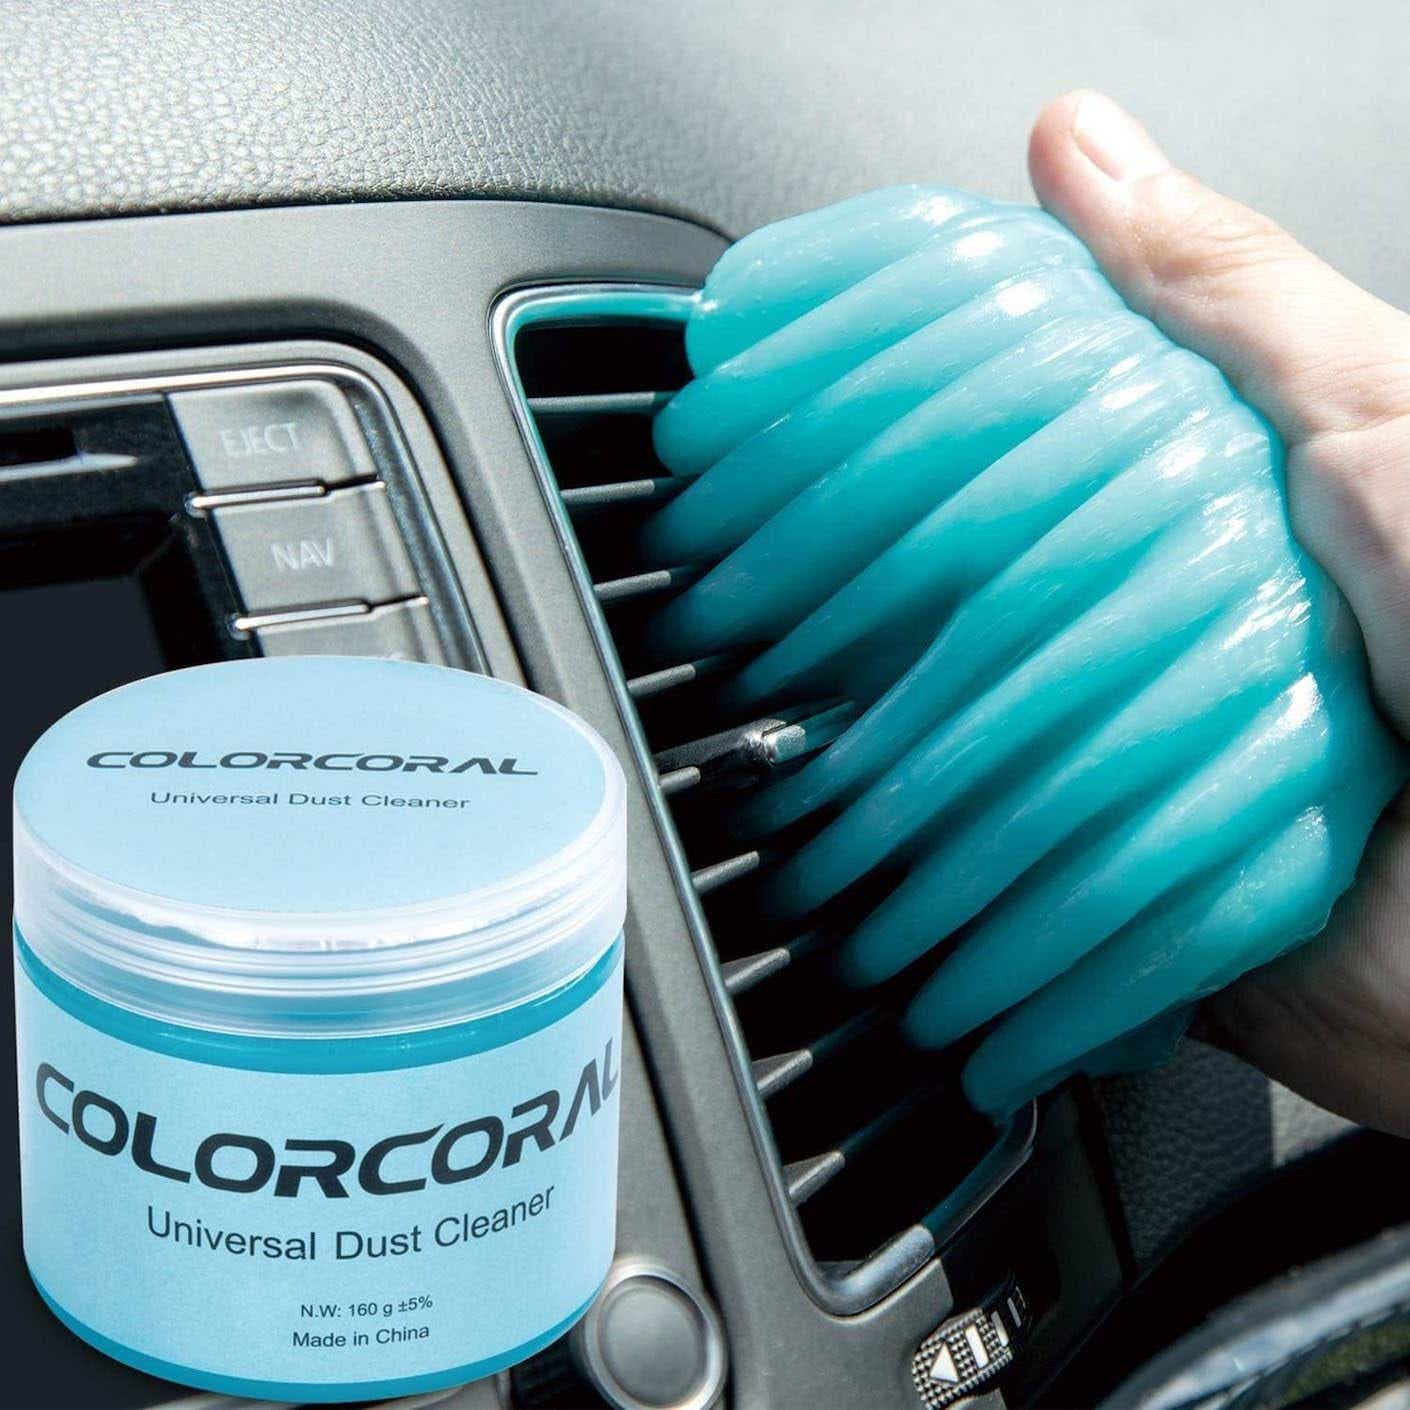 A hand uses blue cleaning gel to clean out the air vents in a car.